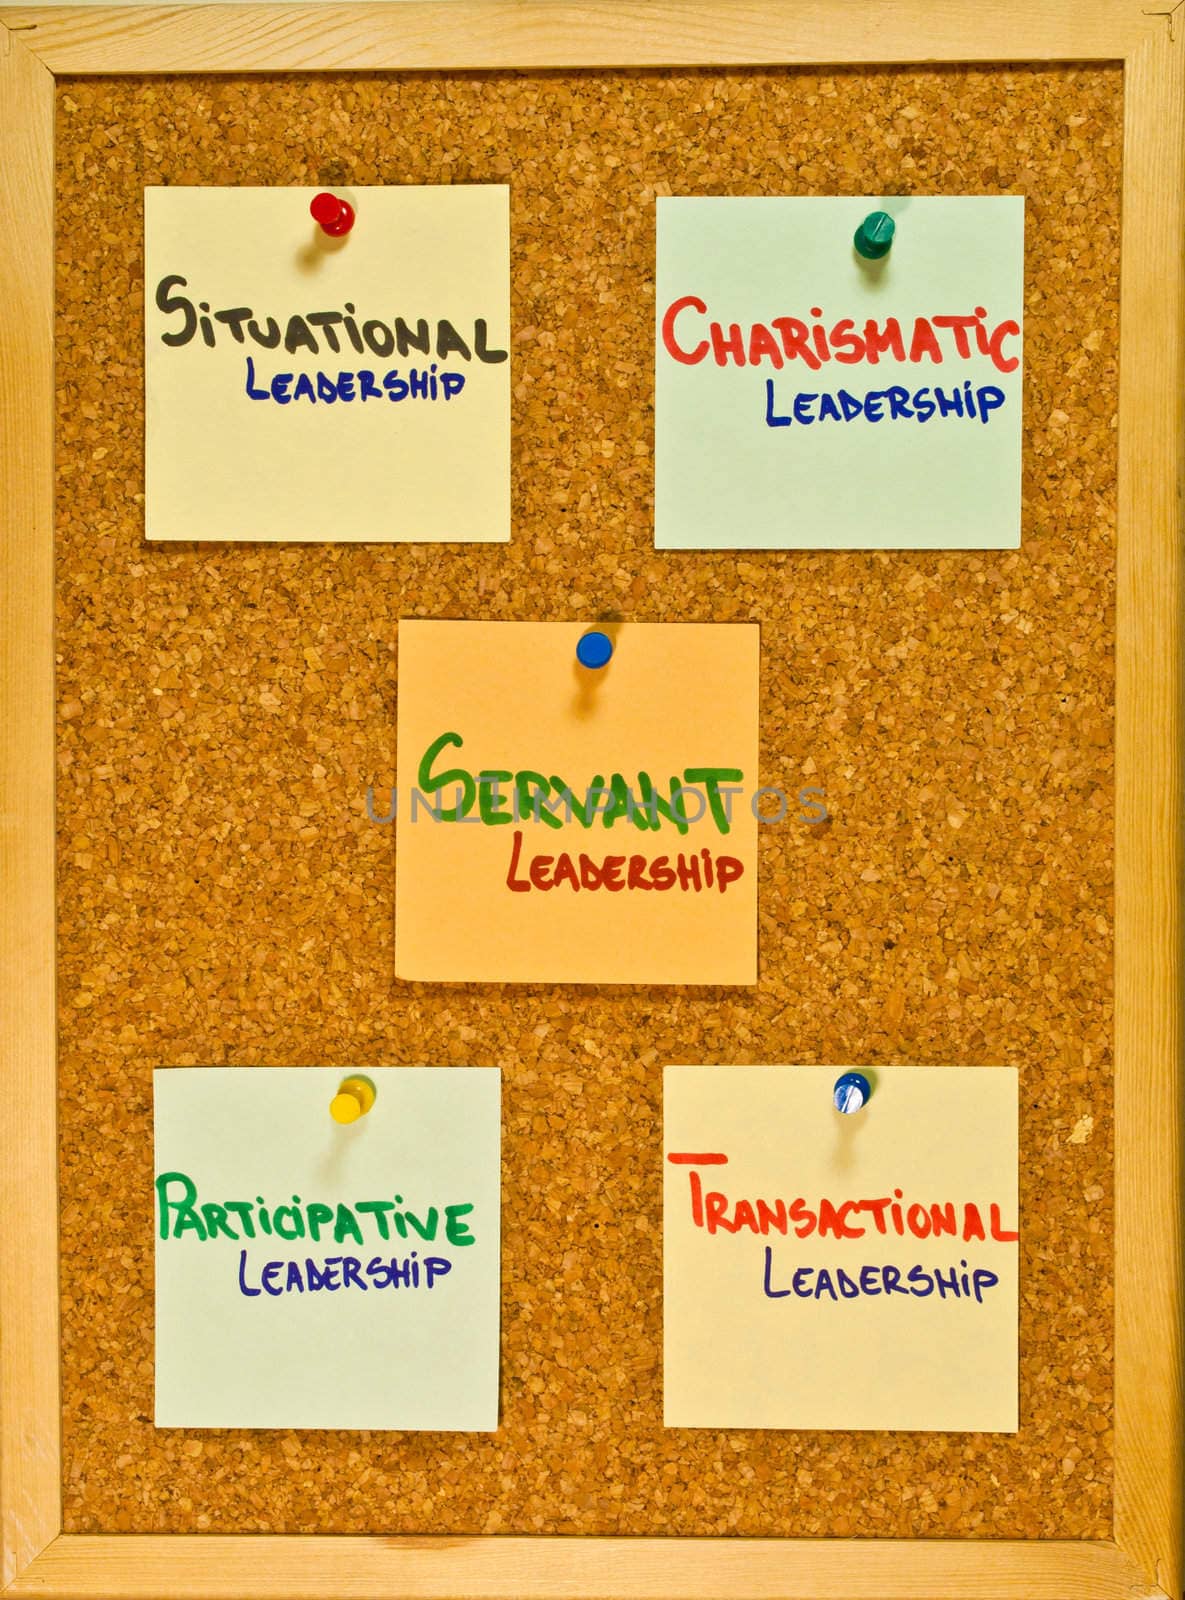 Leadership theories on a wooden board by robertblaga